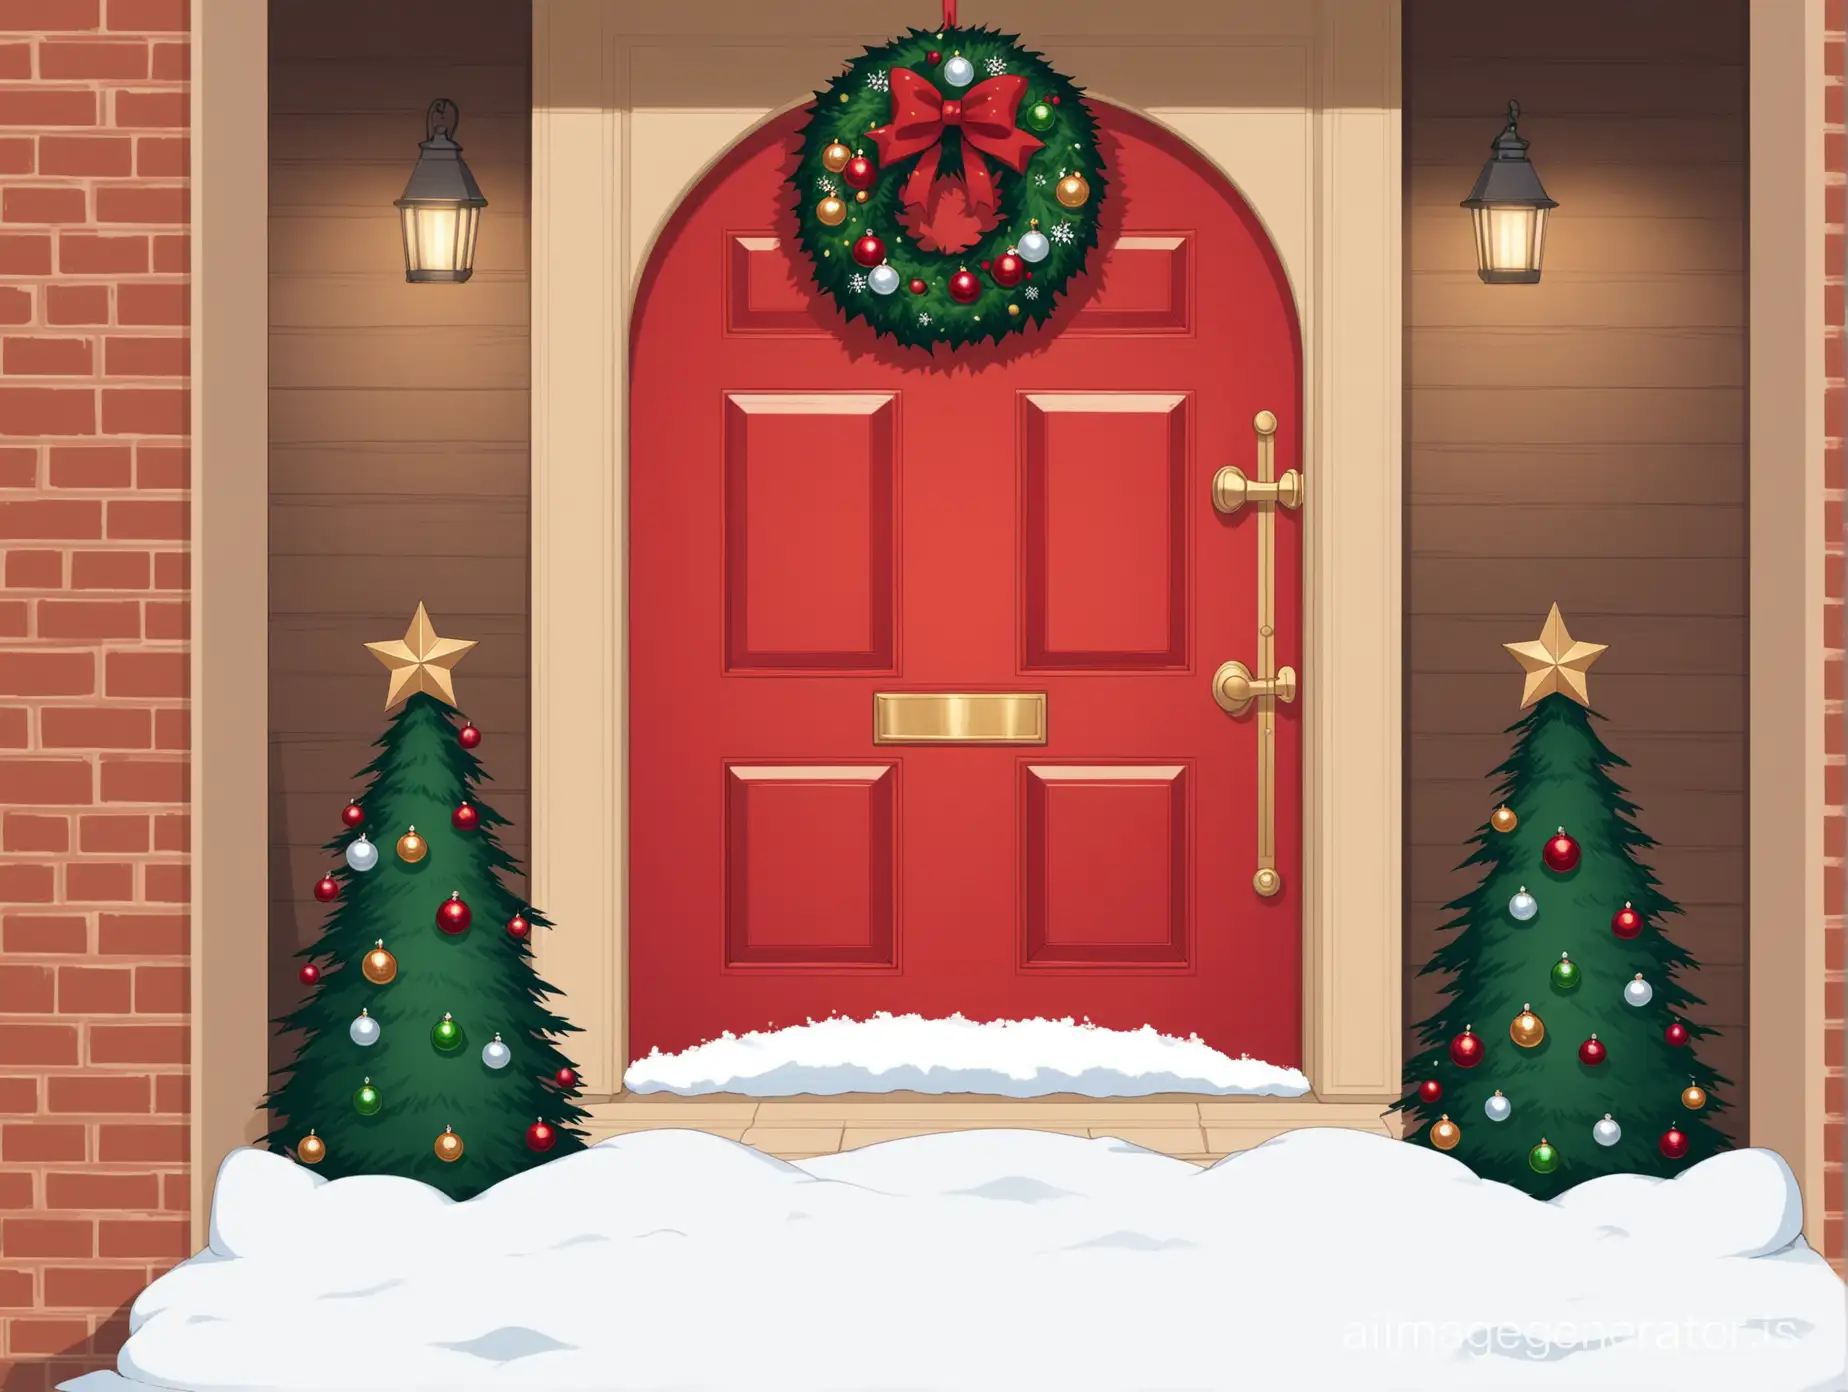 Santas-Festively-Decorated-Front-Door-with-Snow-Traces